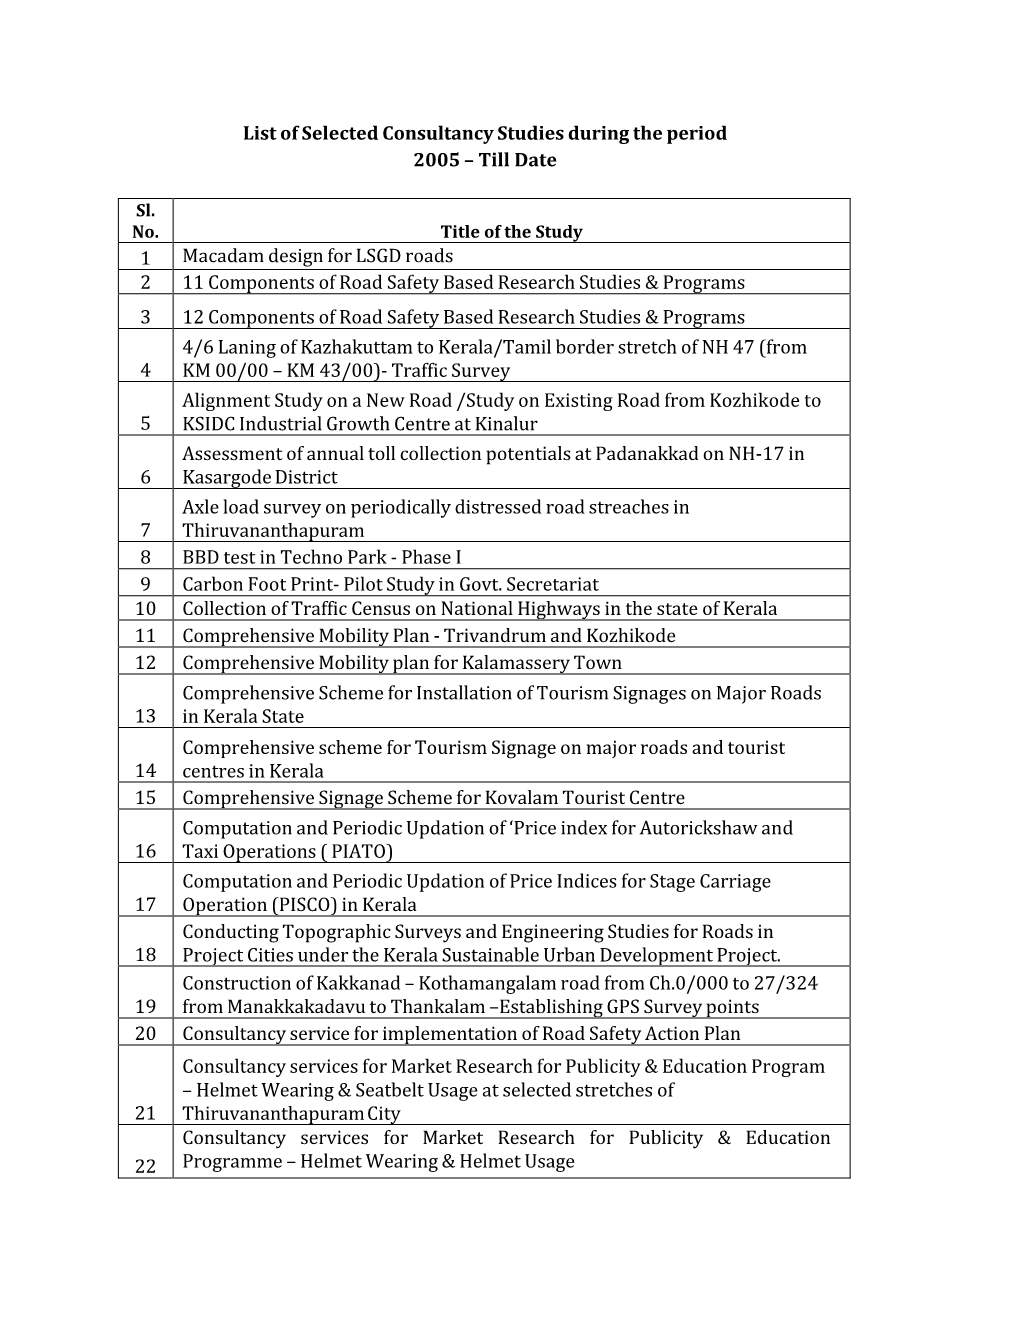 List of Selected Consultancy Studies During the Period 2005 – Till Date